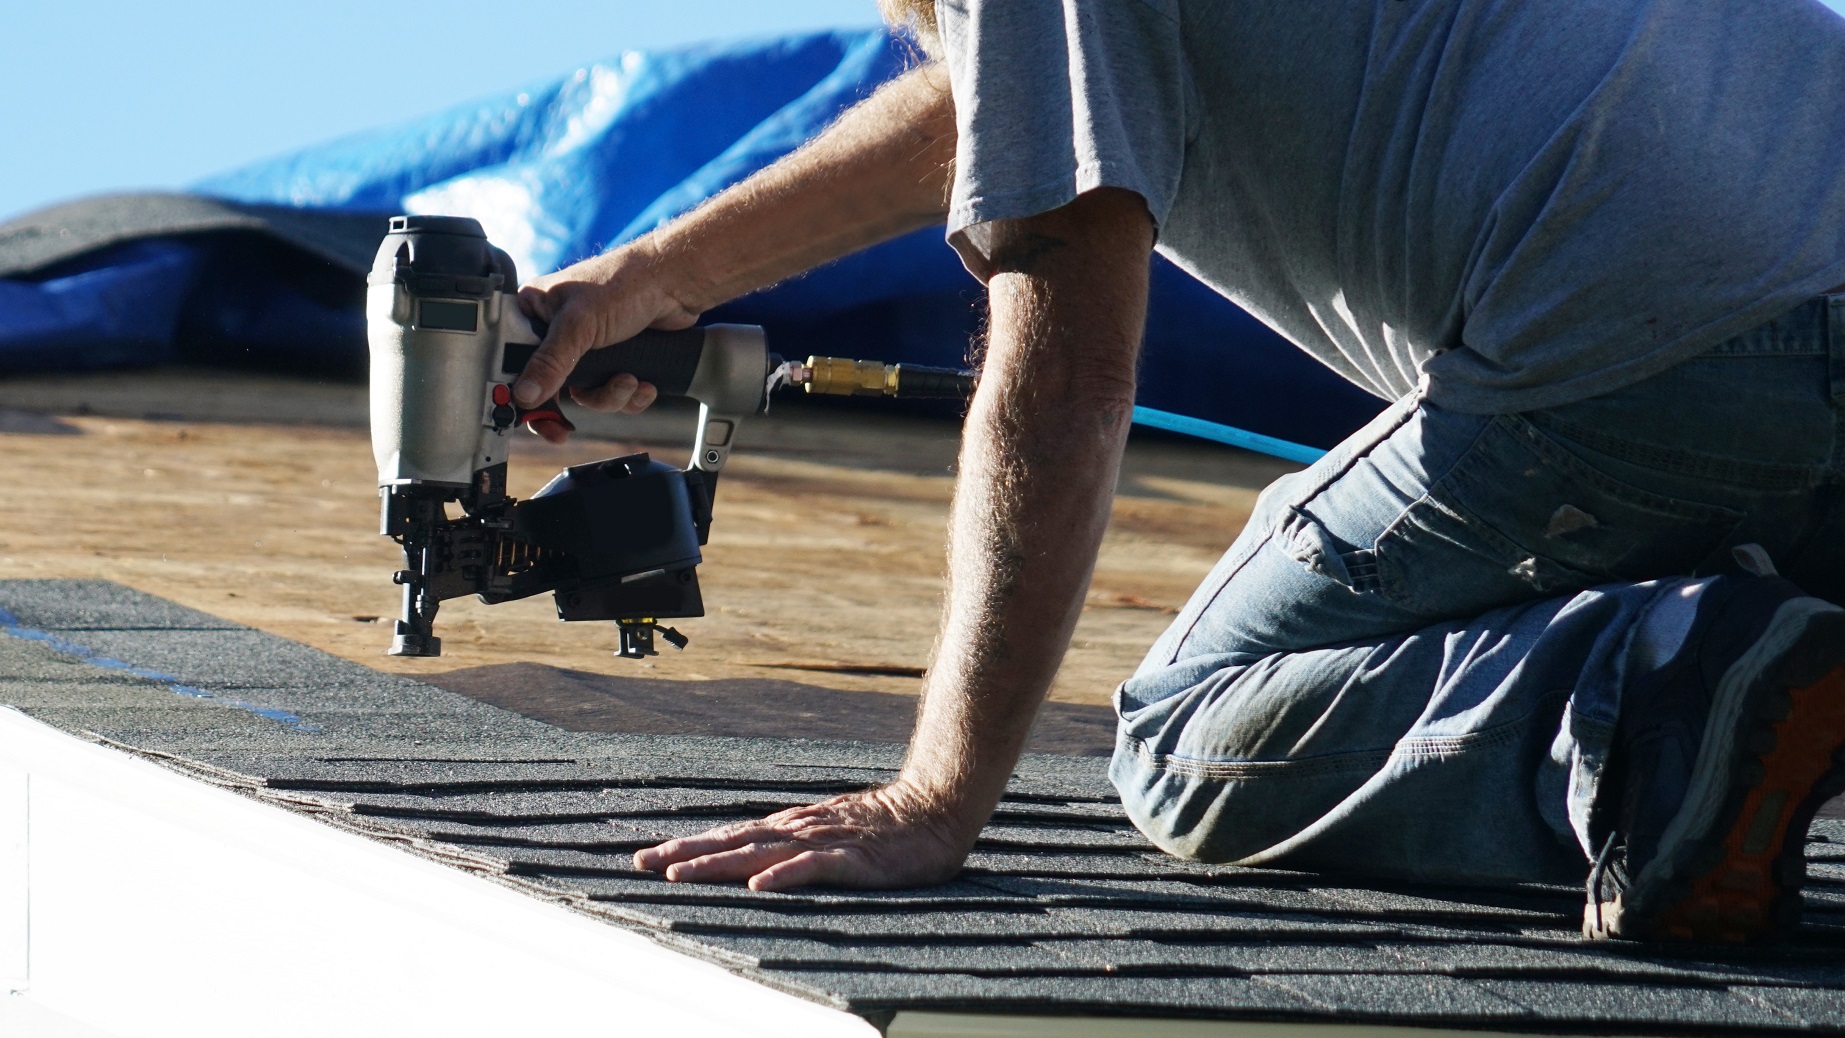 Roofing repairs or a new roof can improve your home